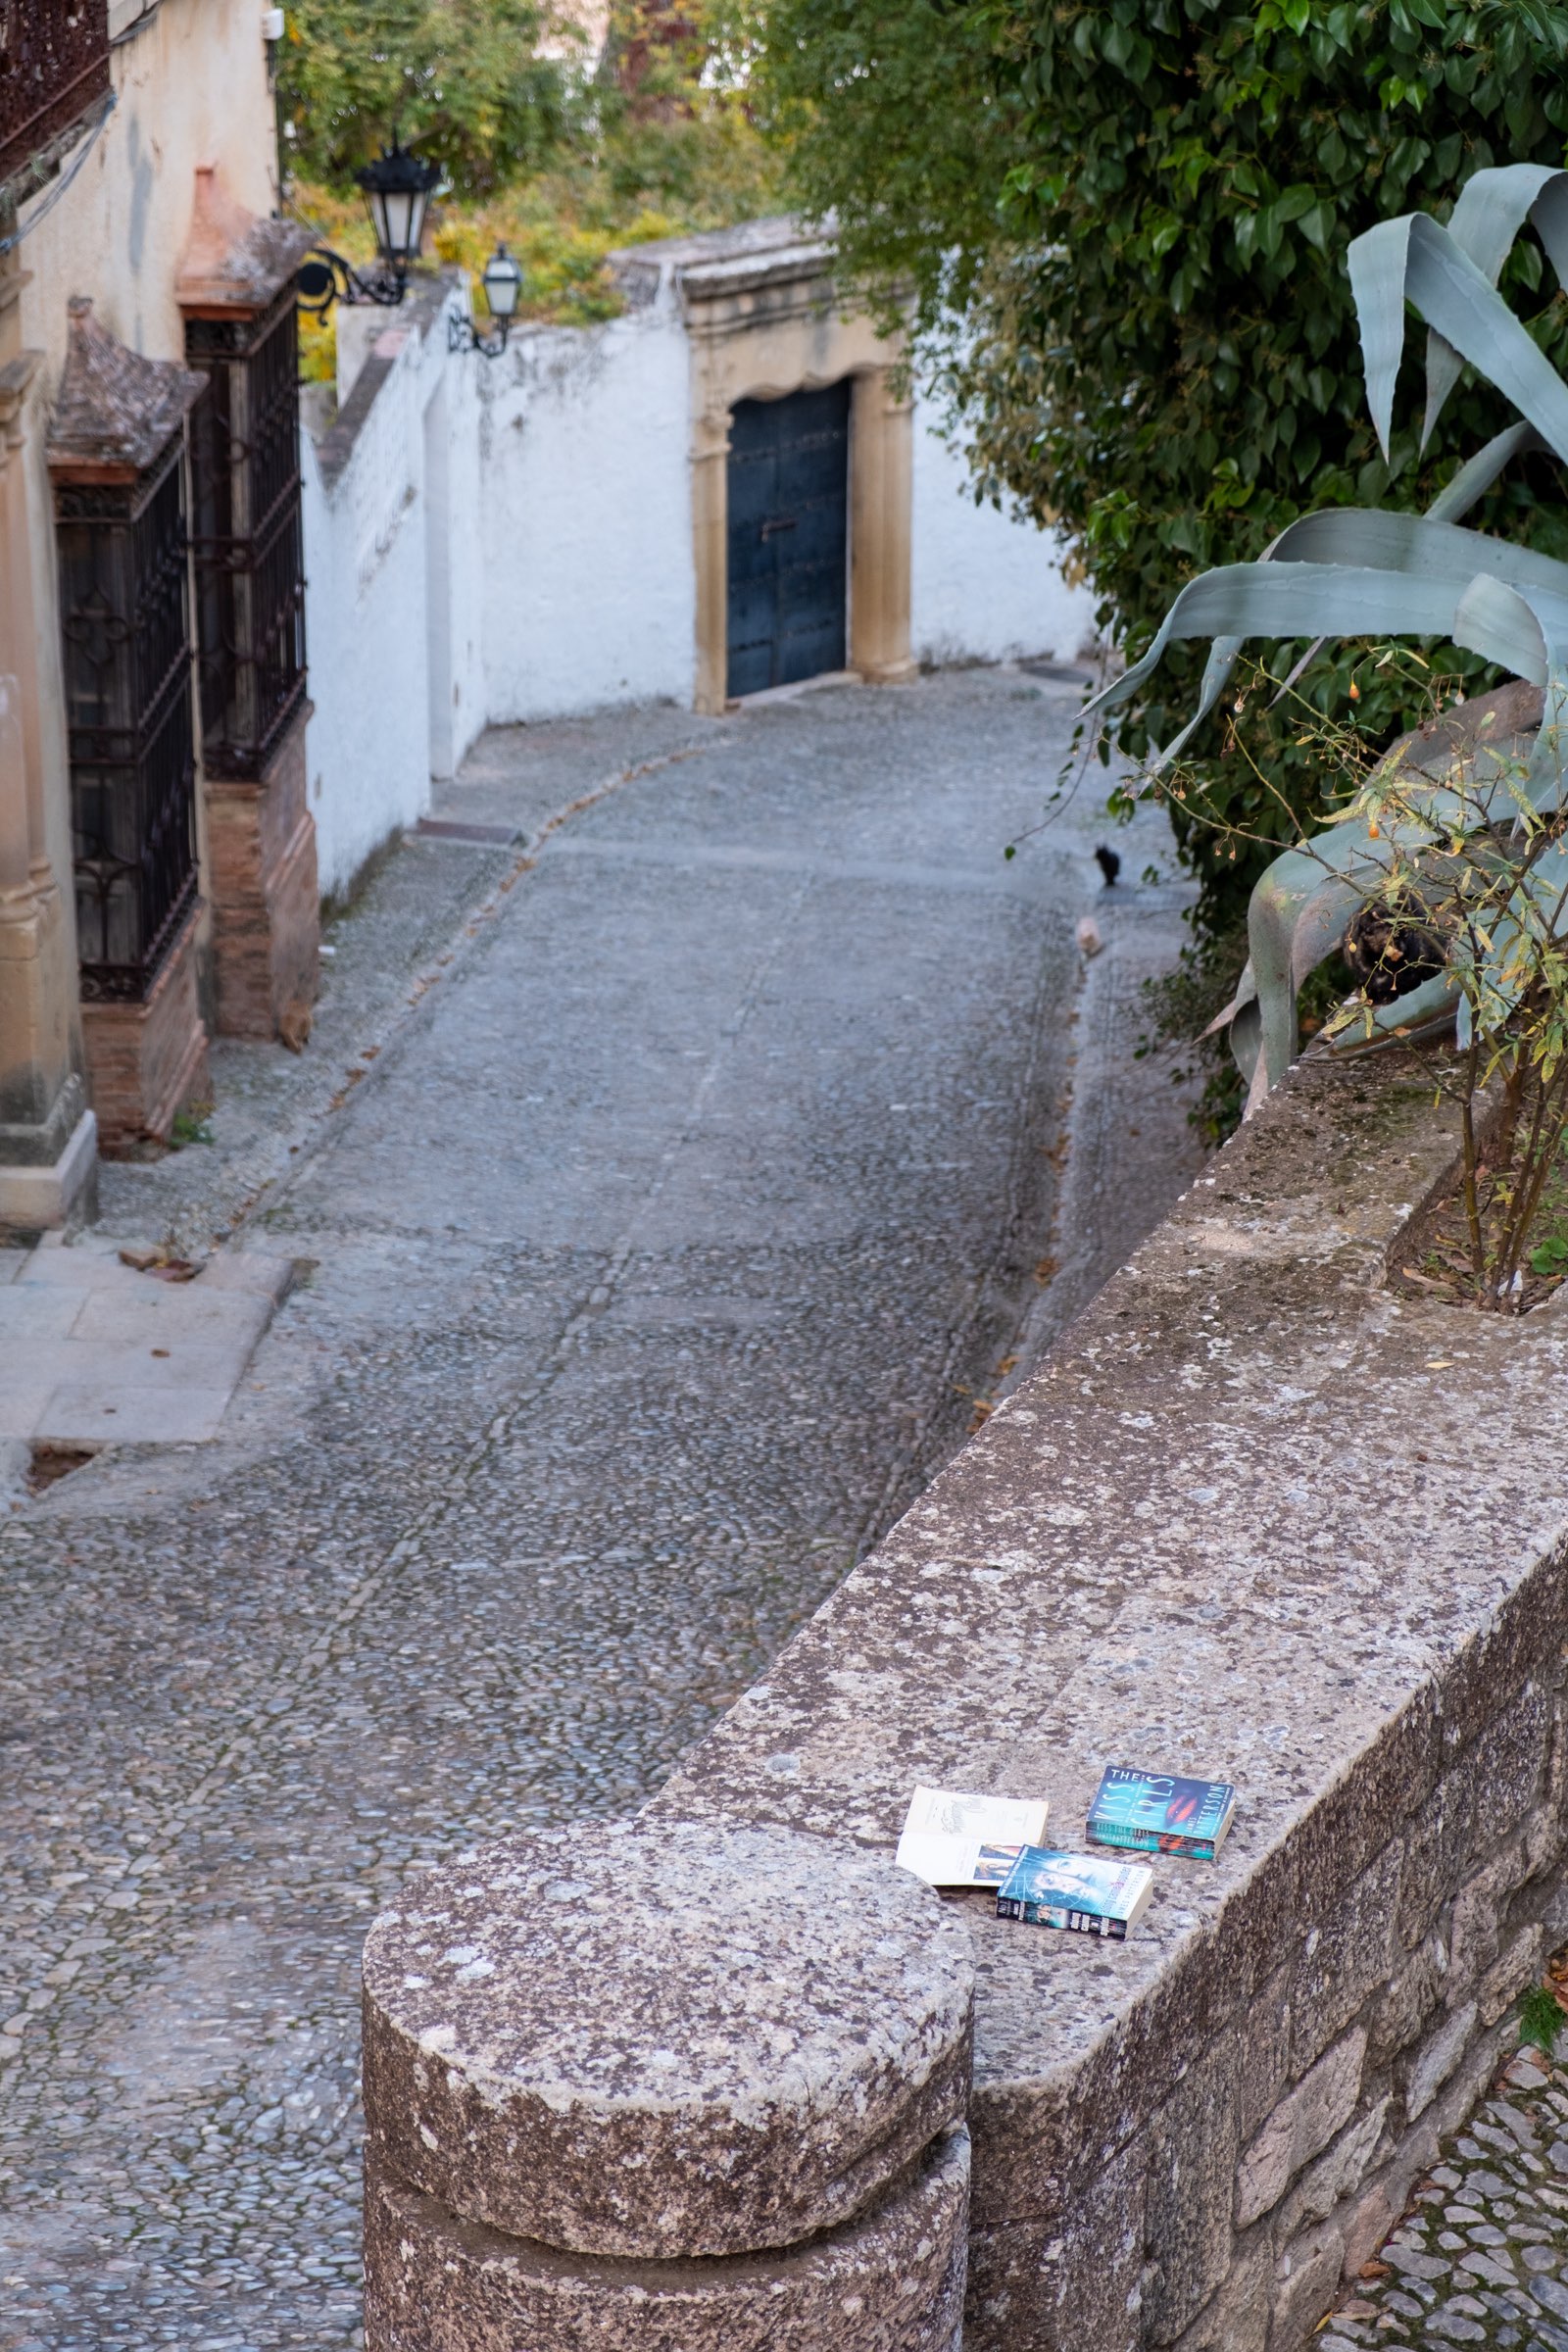 Books left on a wall on a windy cobbled street in Ronda